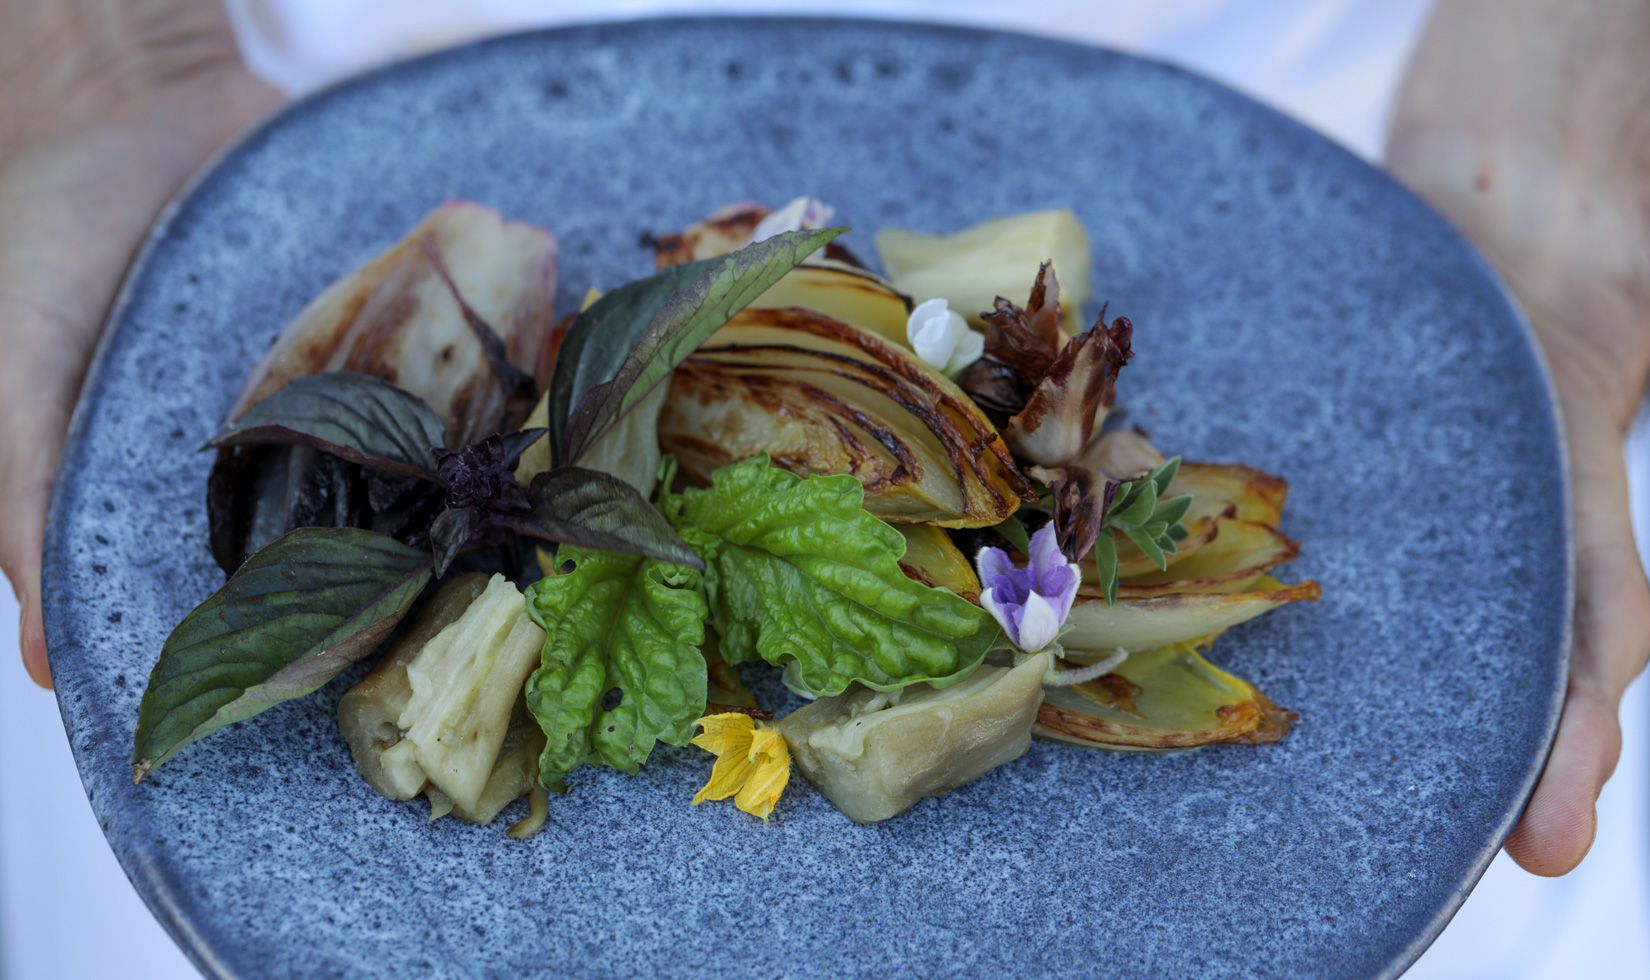 grilled Japanese eggplant with radicchio and endive on blue plate